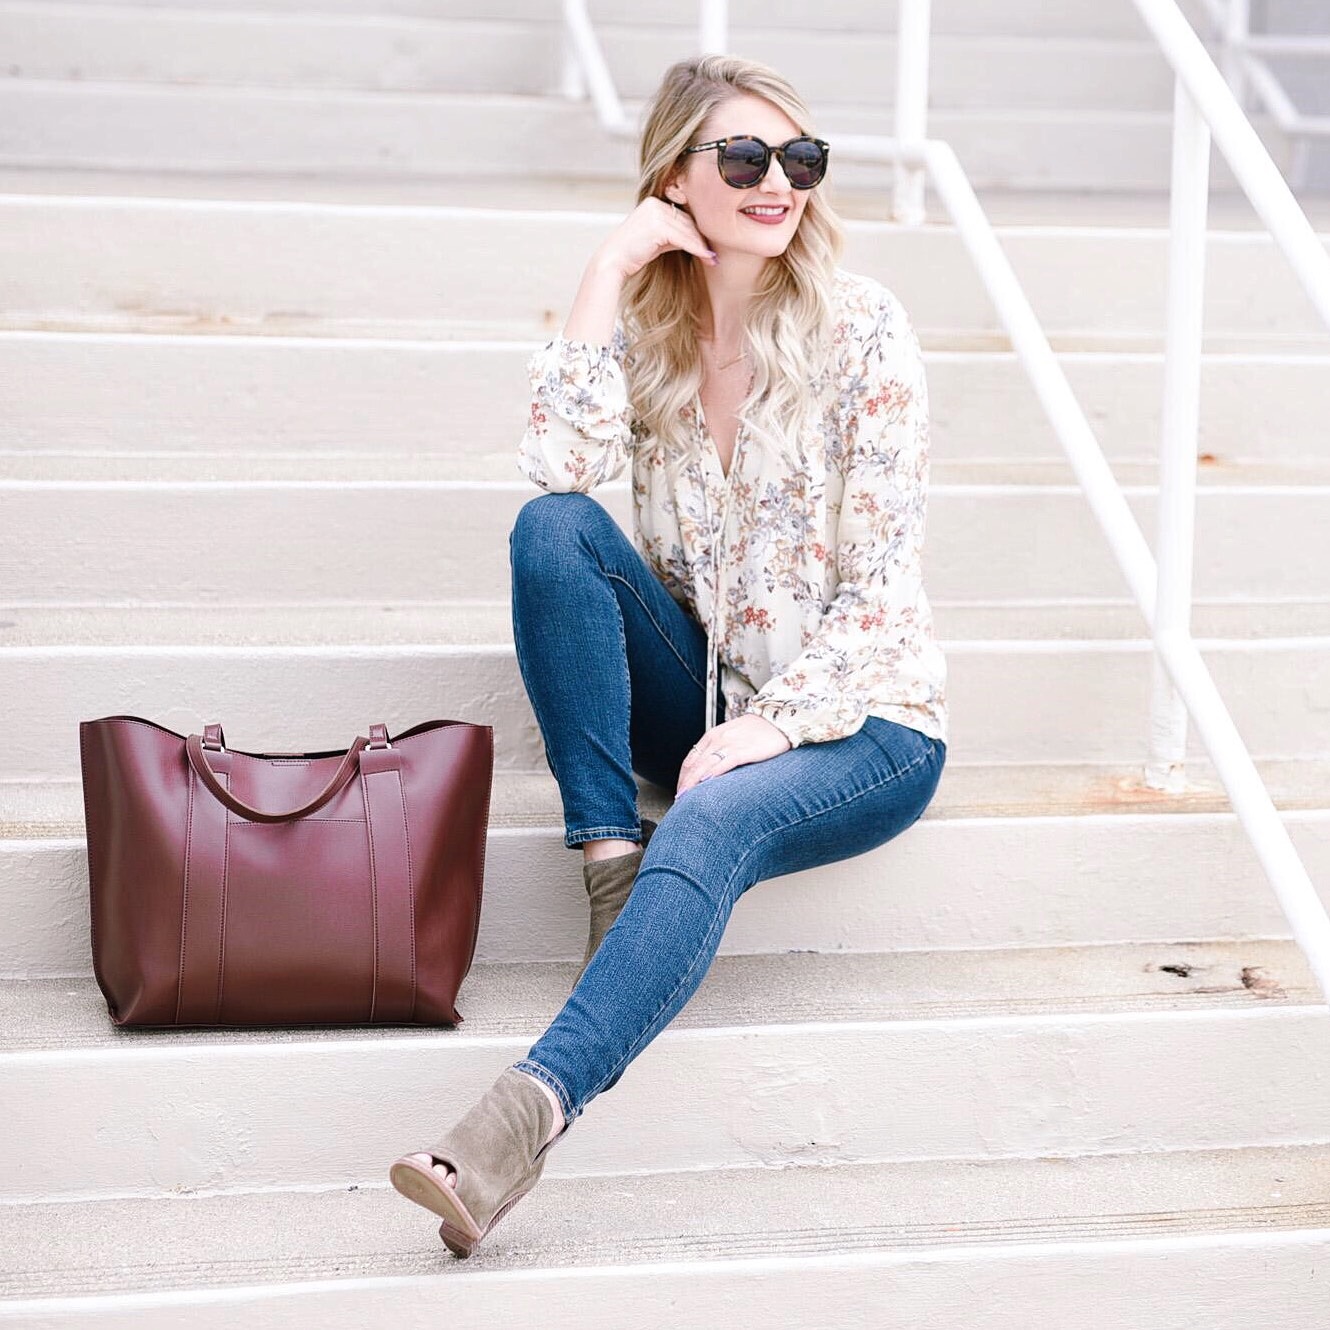 Jenna Colgrove wearing the WAYF floral peasant top and Vince Camute Kathleen booties.